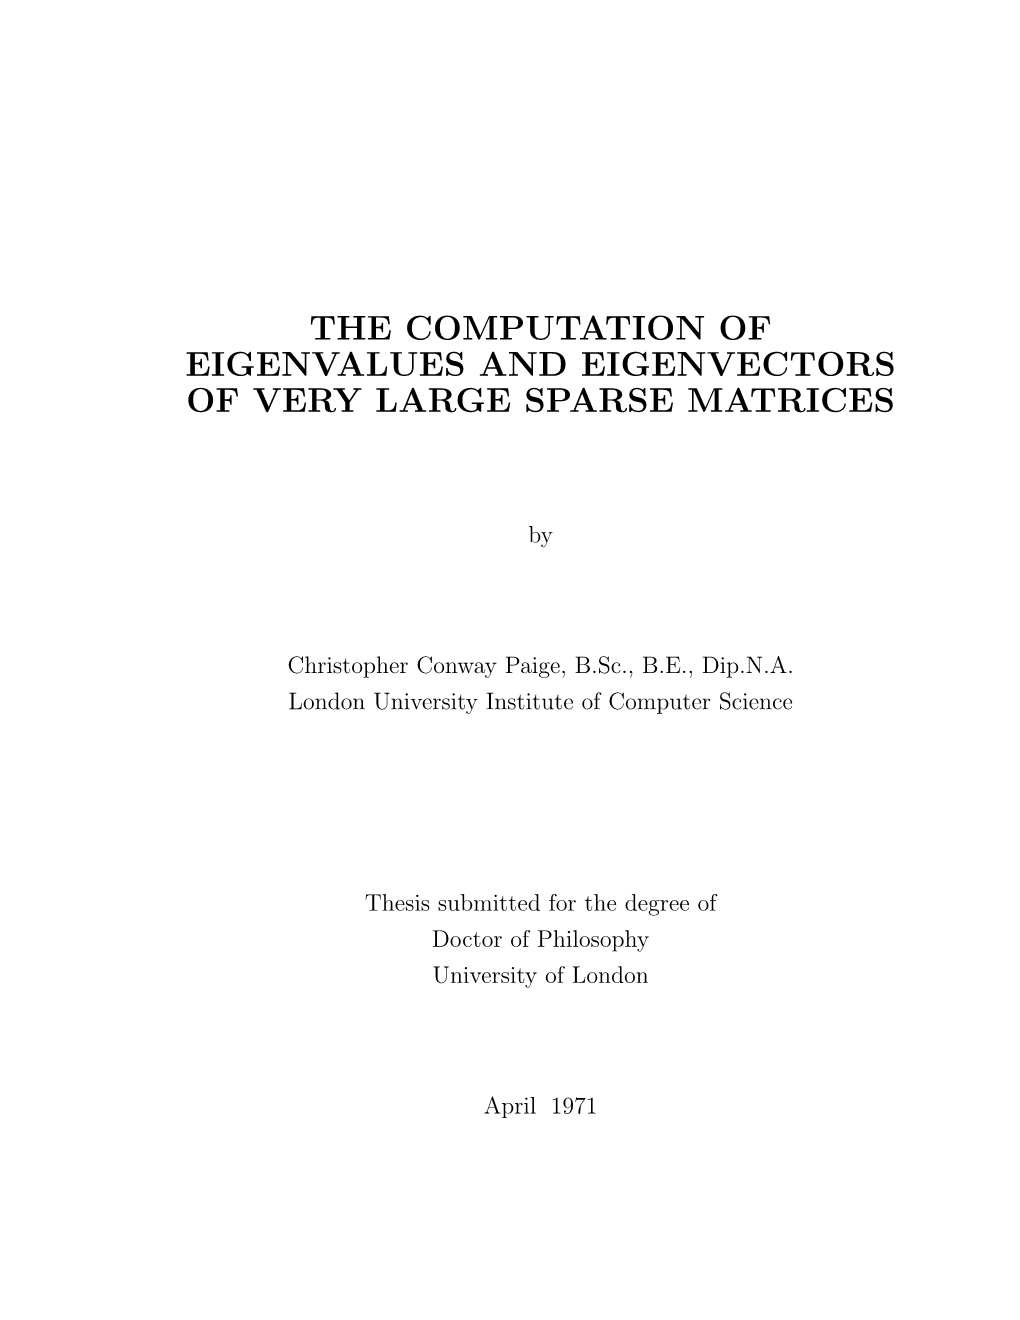 The Computation of Eigenvalues and Eigenvectors of Very Large Sparse Matrices